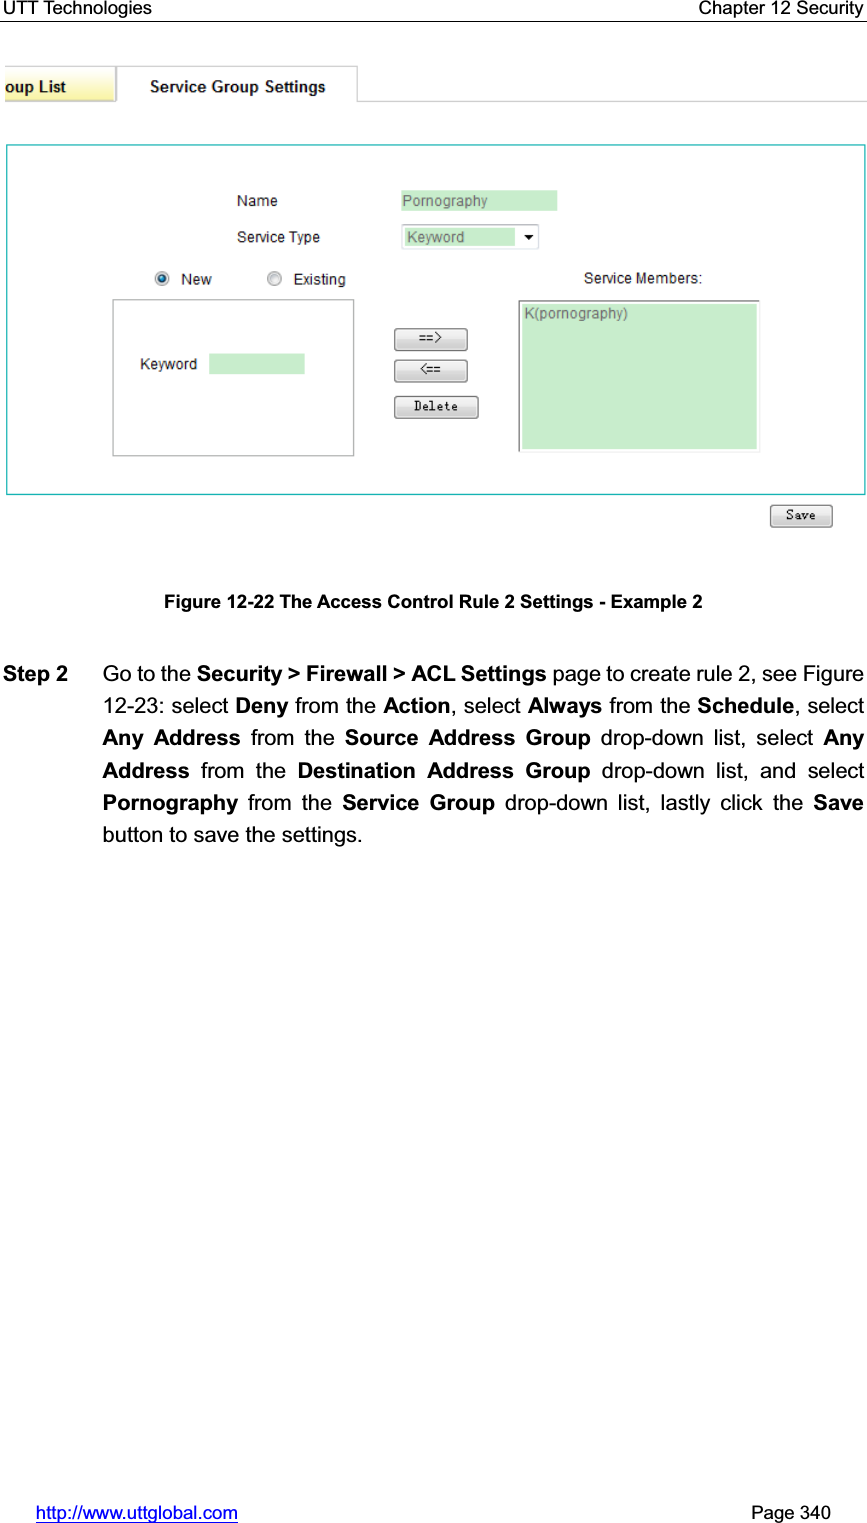 UTT Technologies    Chapter 12 Security   http://www.uttglobal.com                                                       Page 340 Figure 12-22 The Access Control Rule 2 Settings - Example 2 Step 2  Go to the Security &gt; Firewall &gt; ACL Settings page to create rule 2, see Figure 12-23: select Deny from the Action, select Always from the Schedule, select Any Address from the Source Address Group drop-down list, select Any Address from the Destination Address Group drop-down list, and select Pornography from the Service Group drop-down list, lastly click the Savebutton to save the settings. 